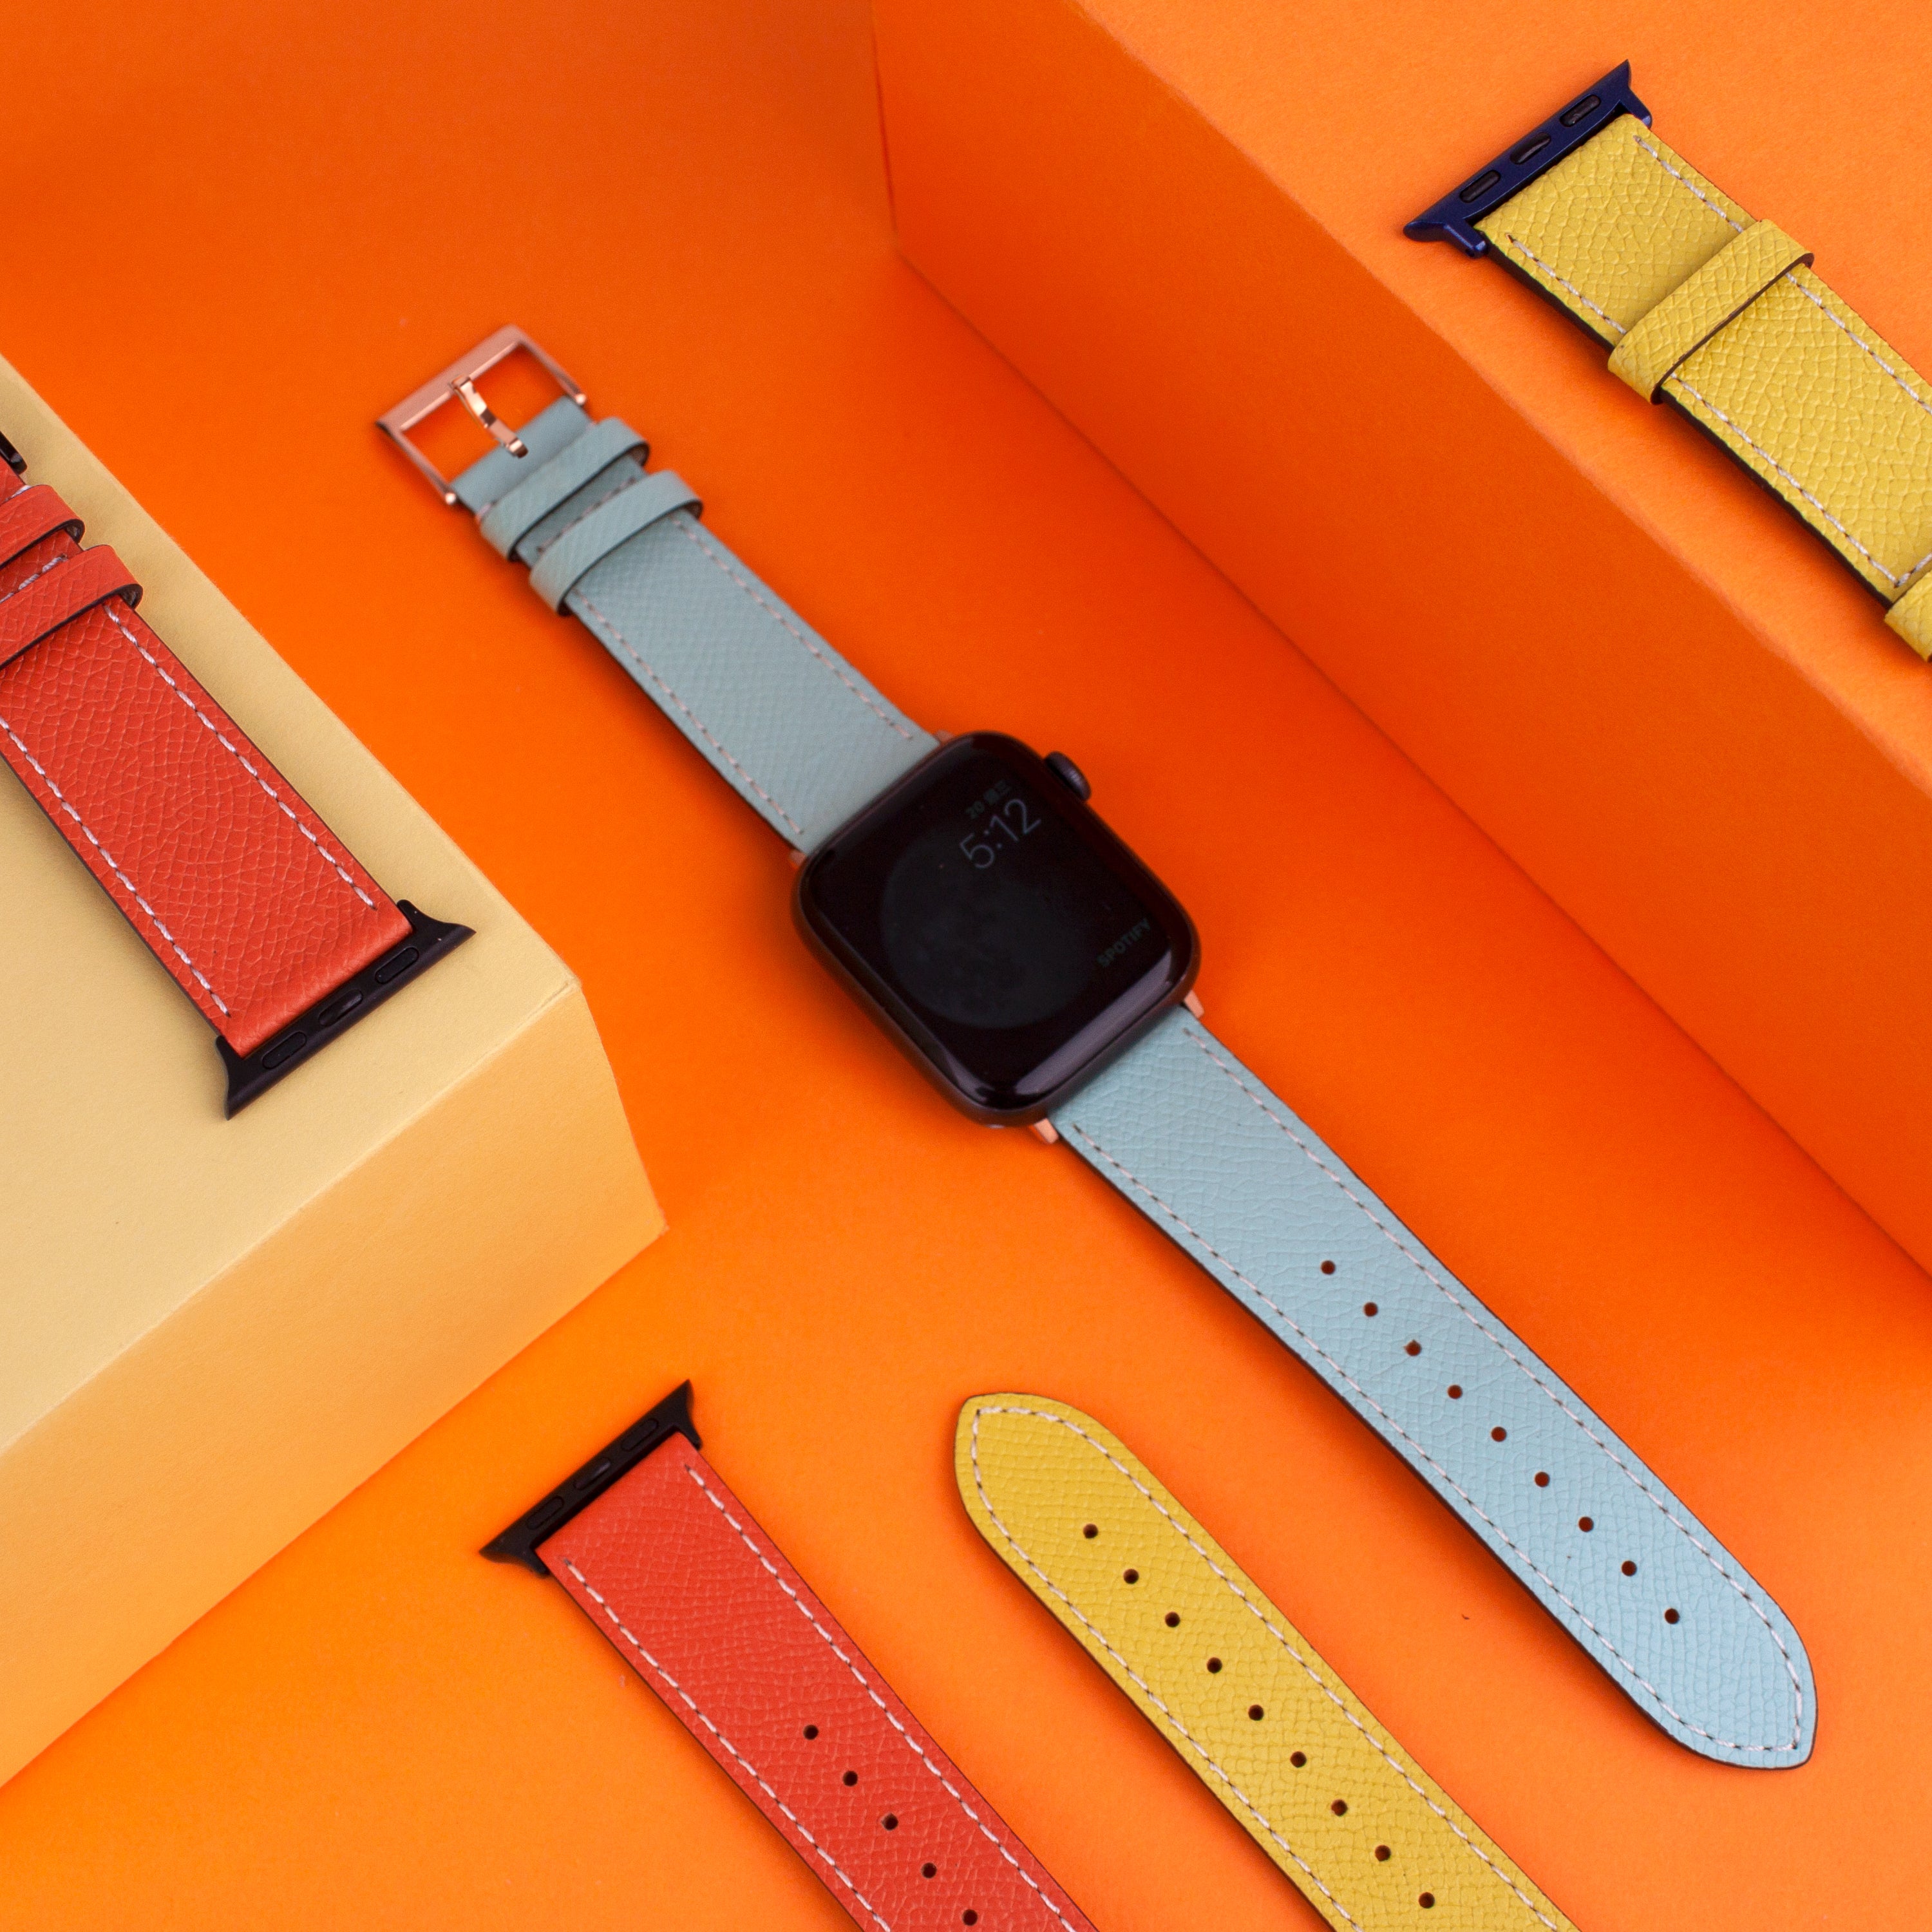 watch band-apple watch錶帶推薦-leather strap-皮錶帶推薦-gift for her-apple watch se錶帶